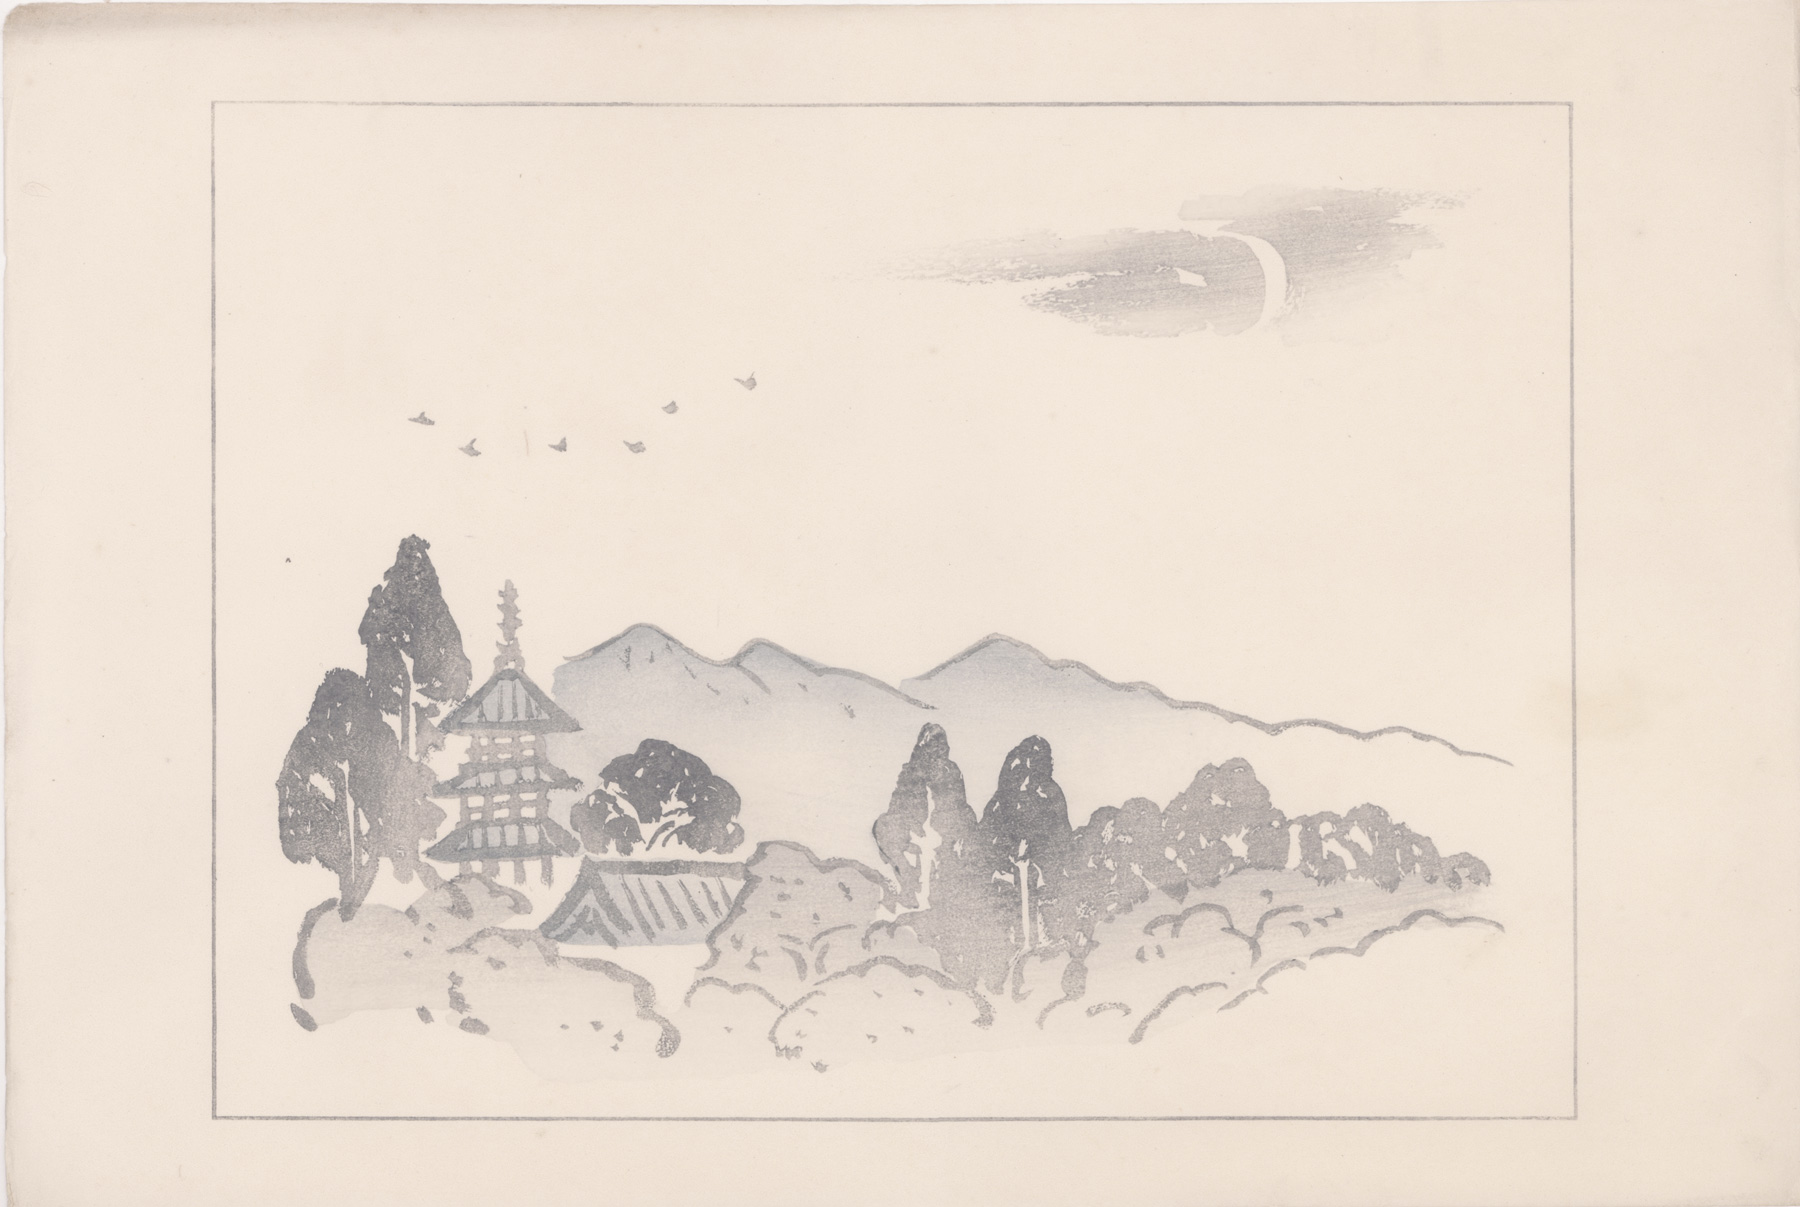 Nara from the Picture Album of the Thirty-Three Pilgrimage Places of the Western Provinces